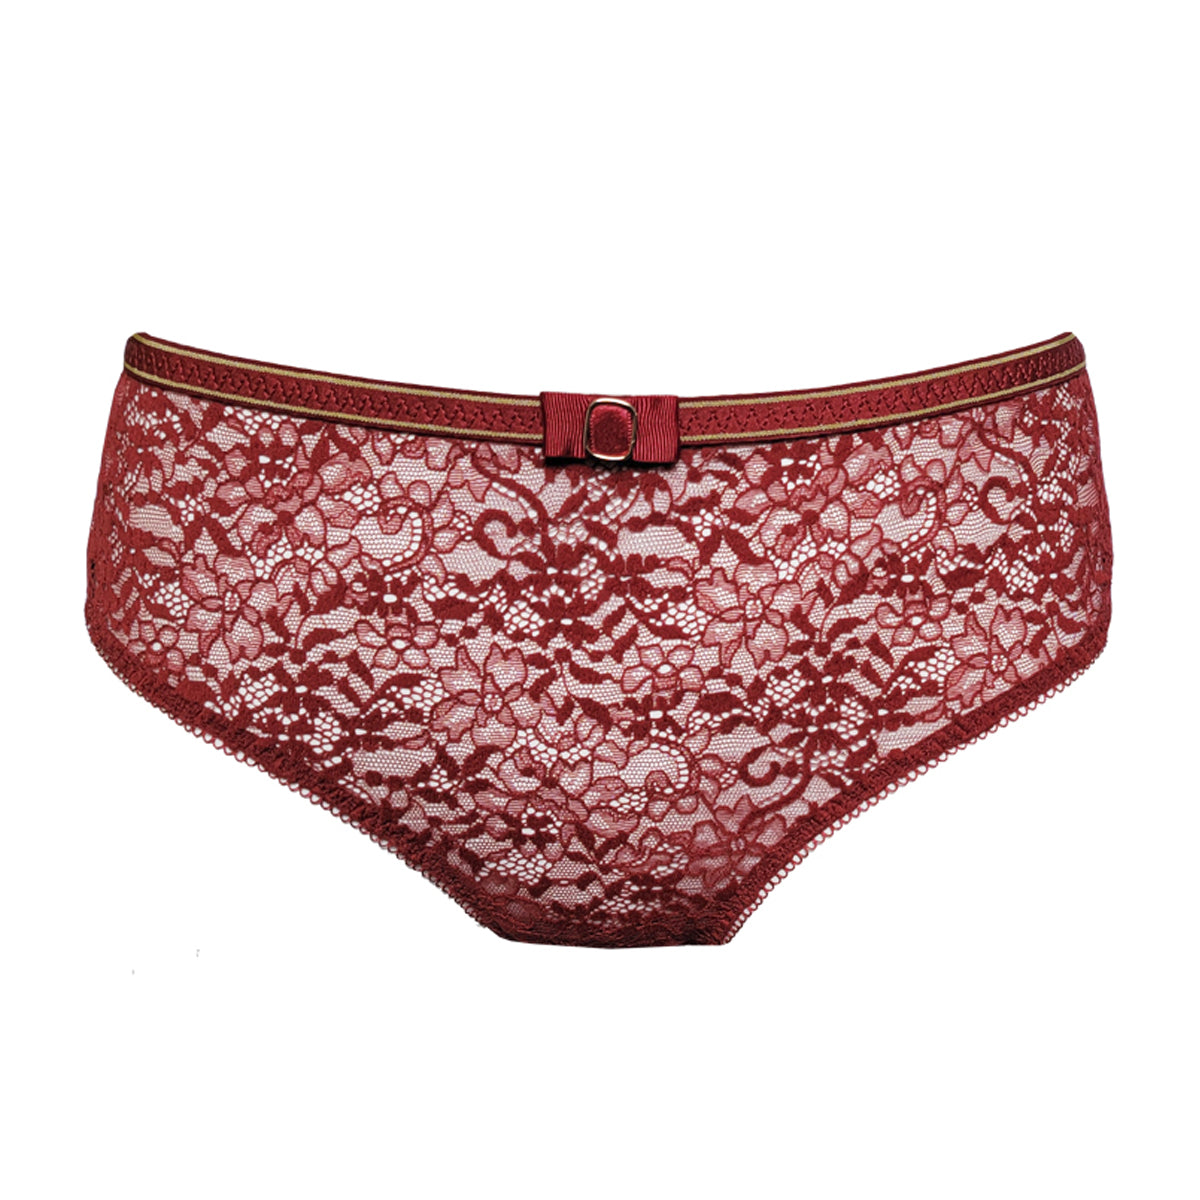 HAH Easy Access Panty - Siren Red